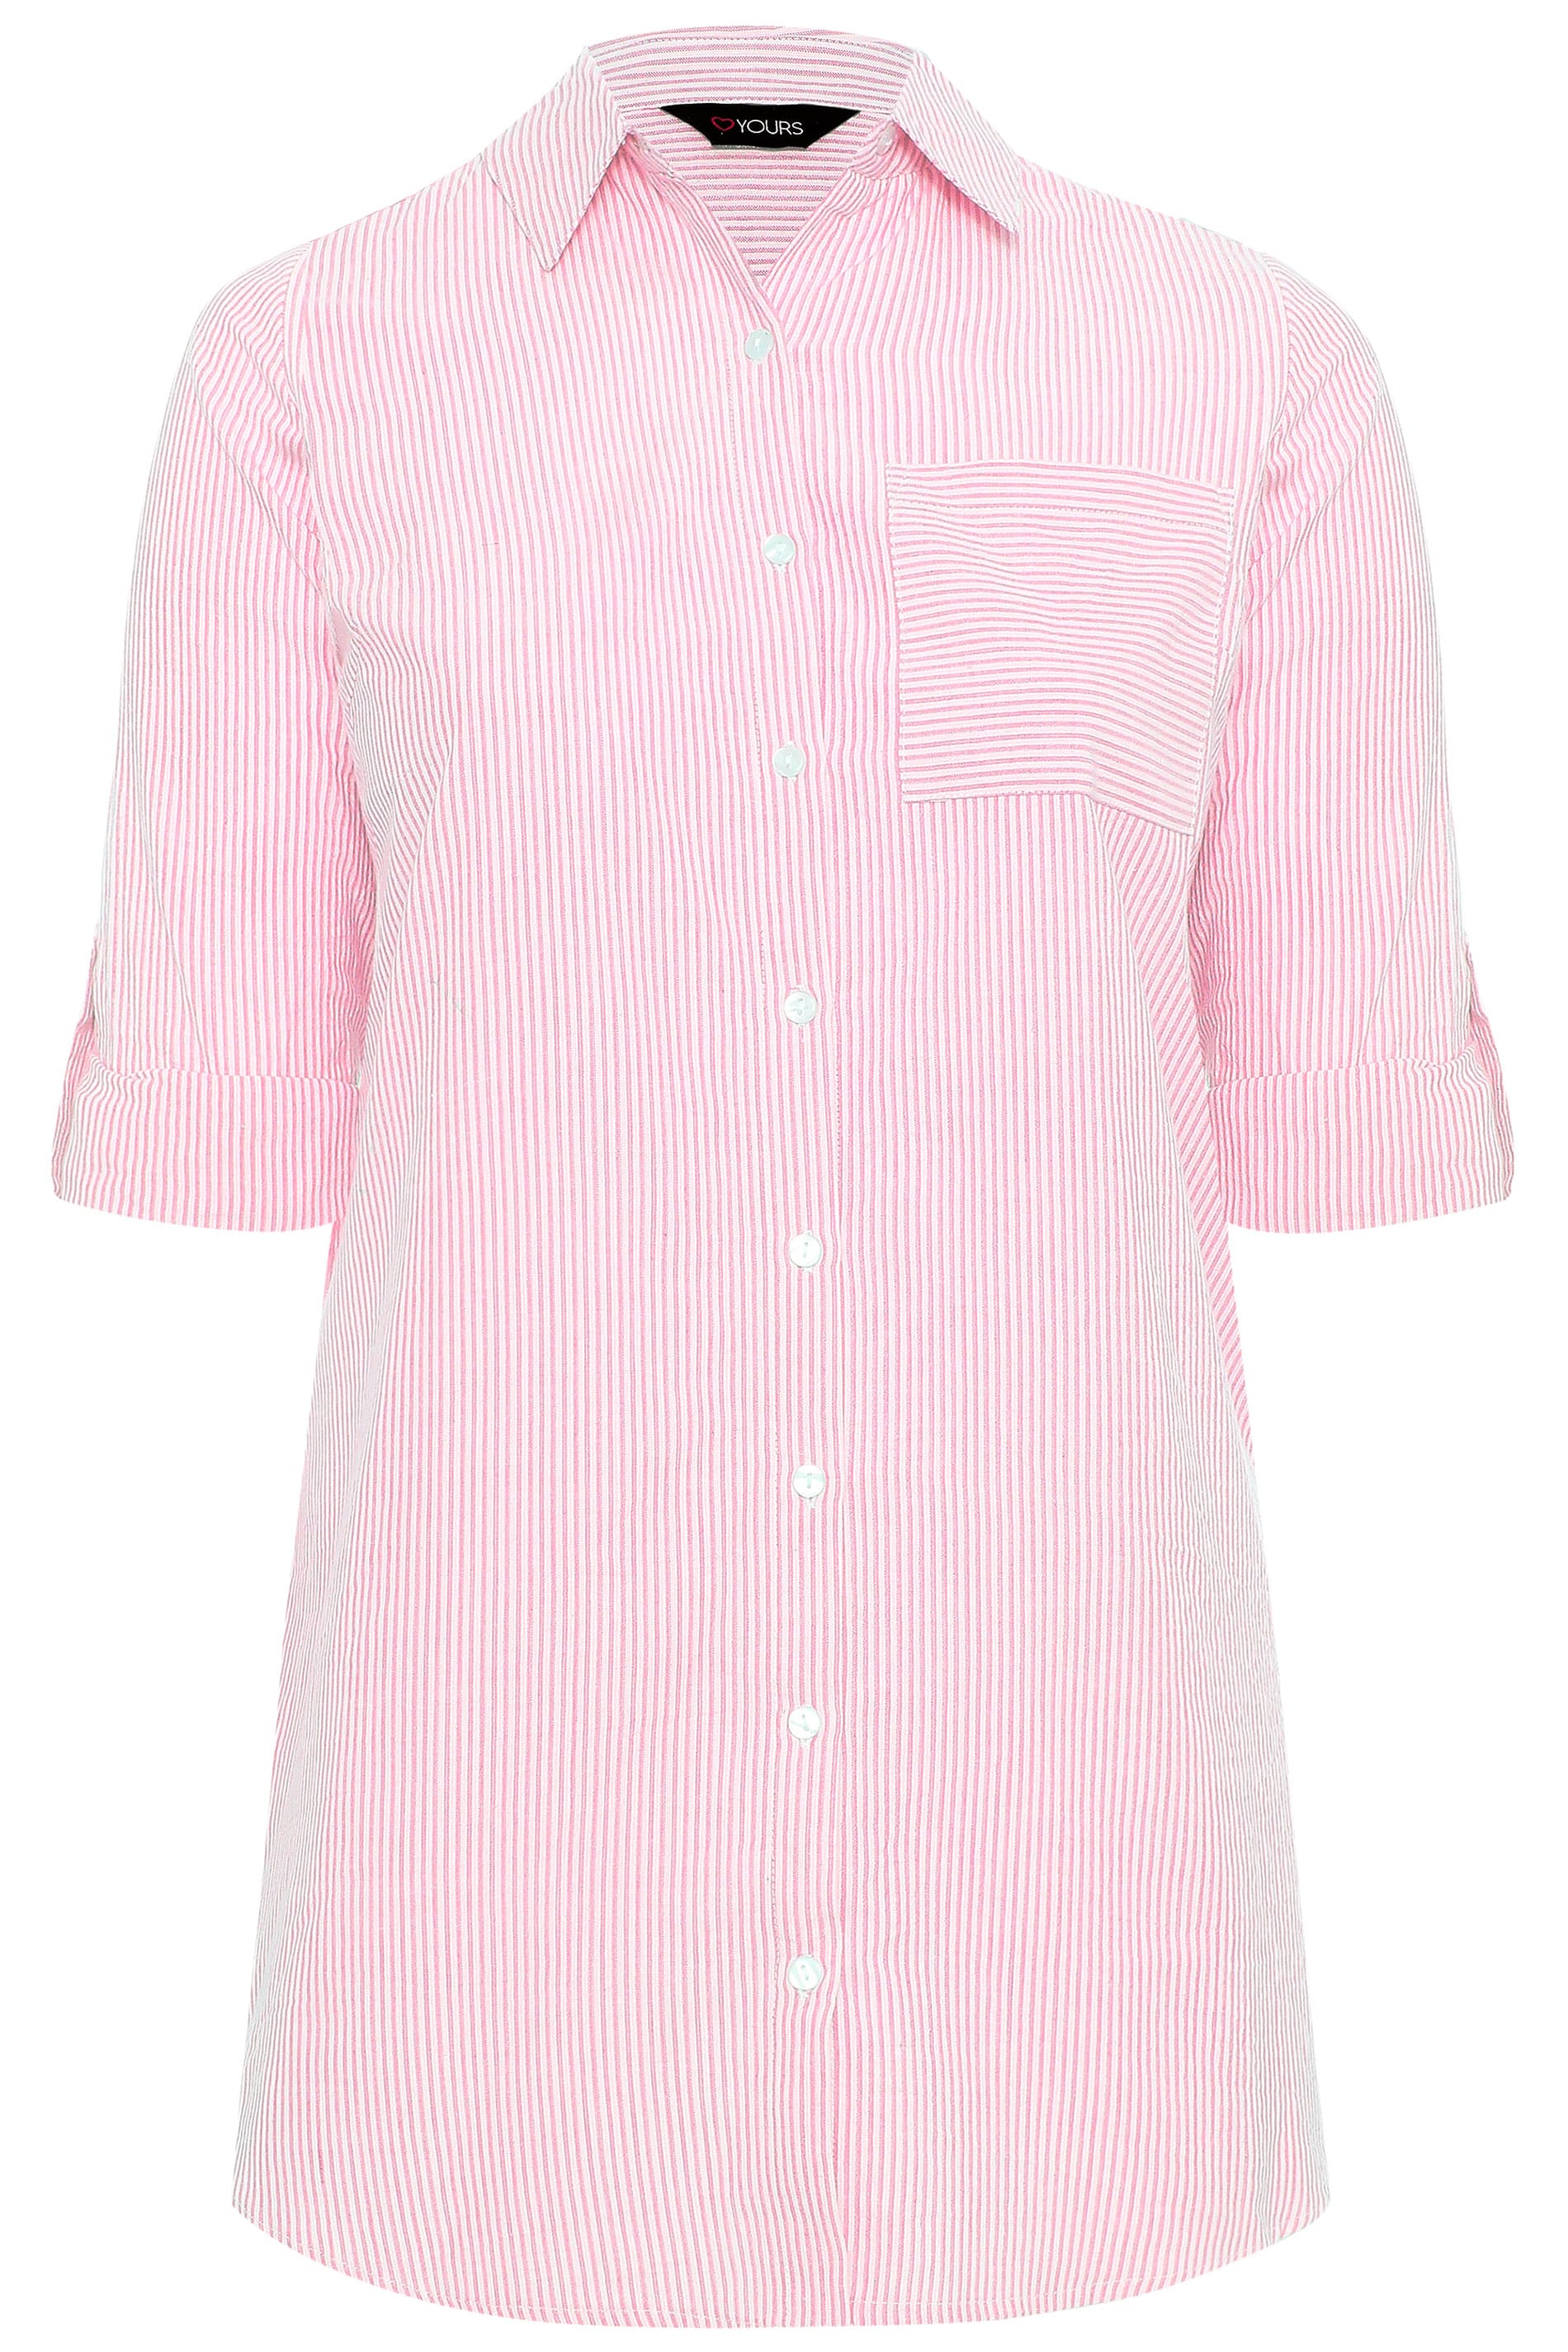 Pink Pinstripe Shirt | Yours Clothing